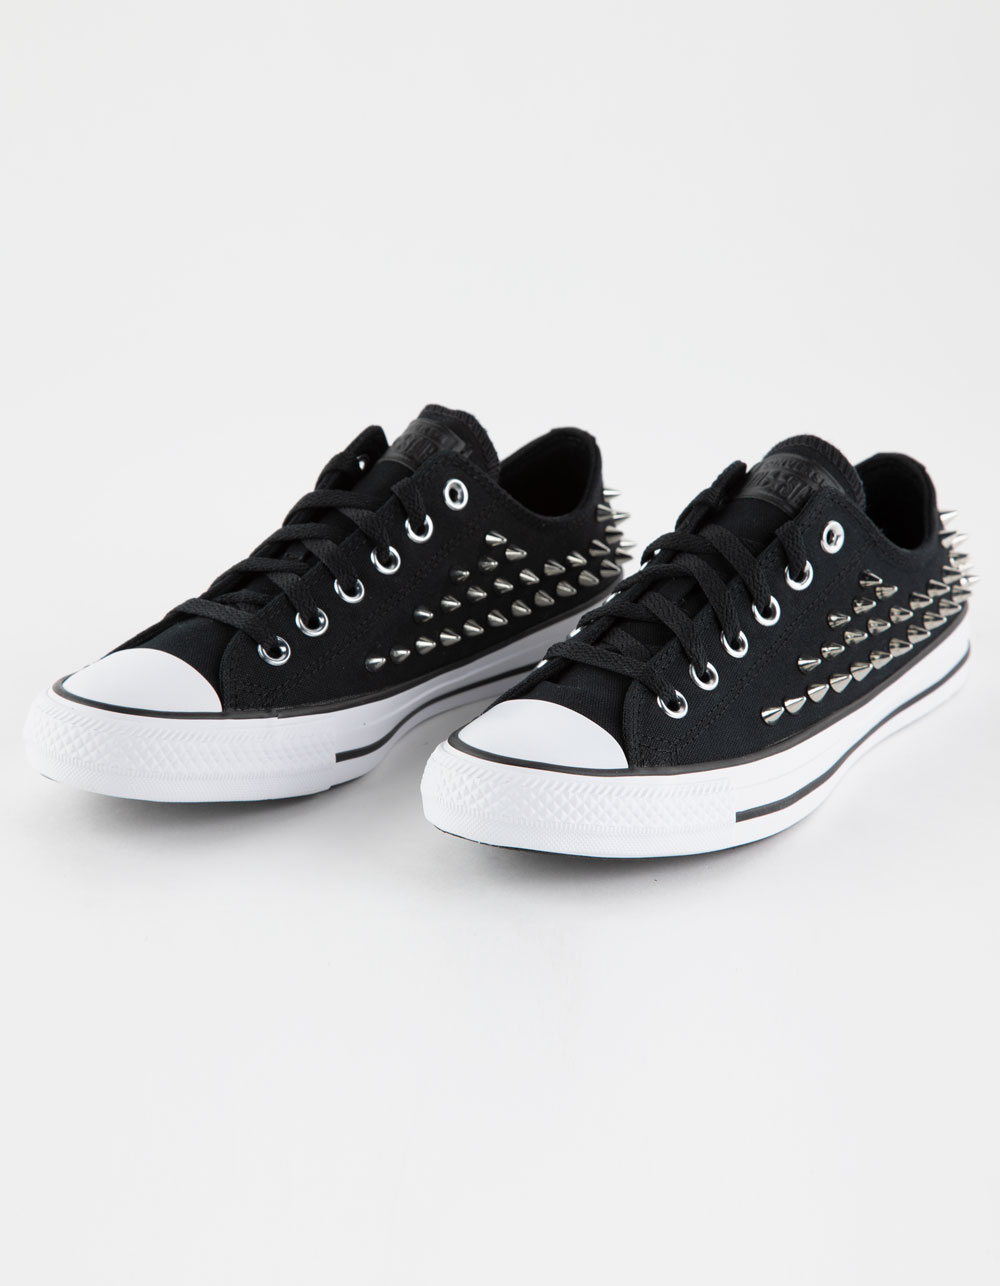 CONVERSE Chuck Taylor All Star Studded Womens Low Top Shoes